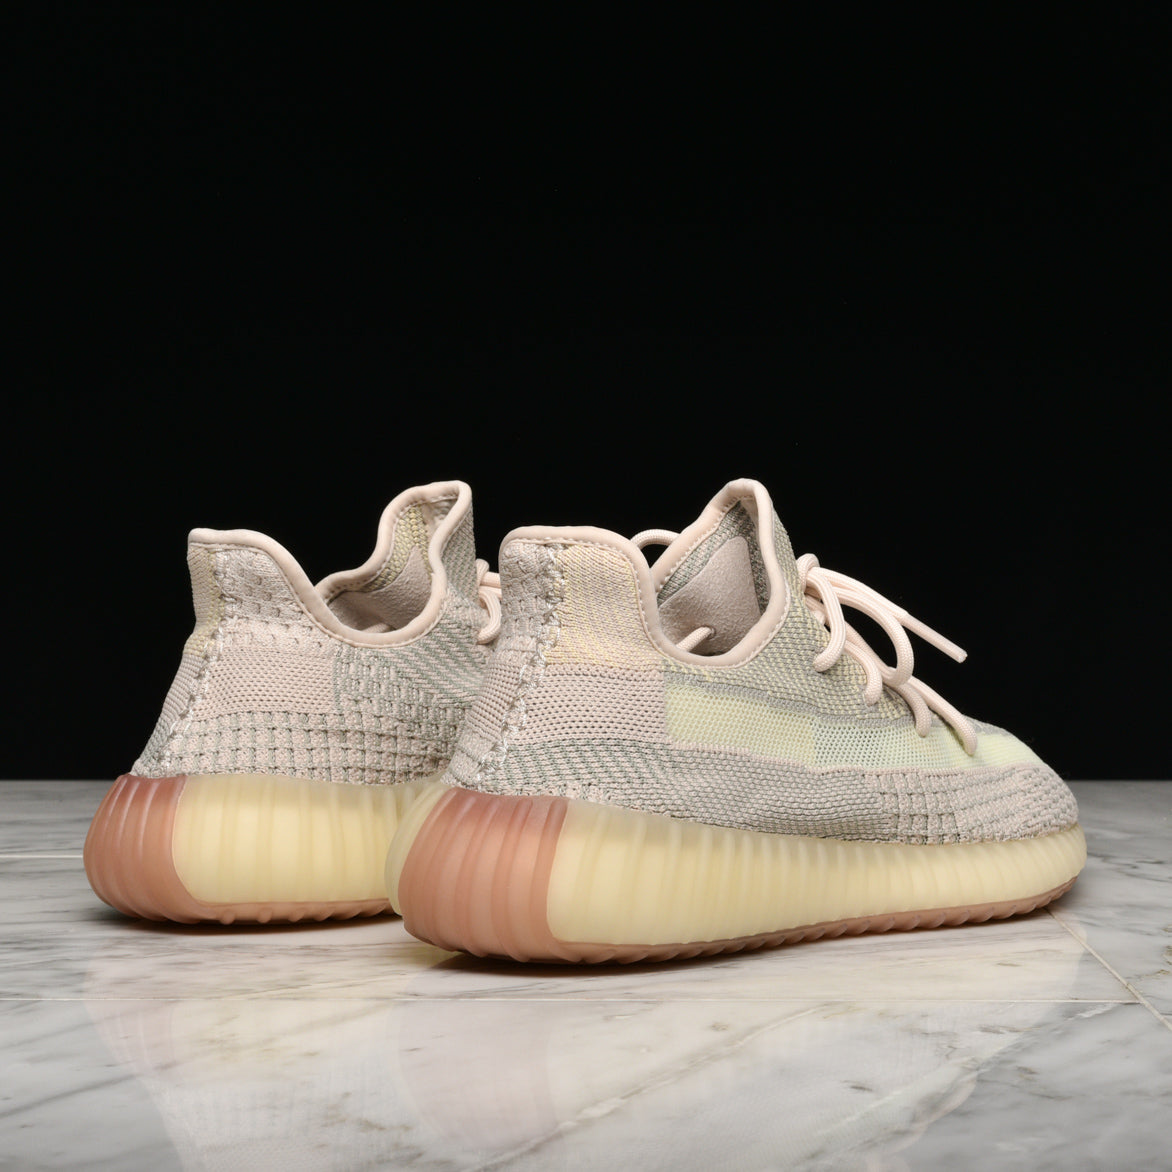 HOW TO COP YEEZY 350 V2 CLOUD WHITE & CITRIN